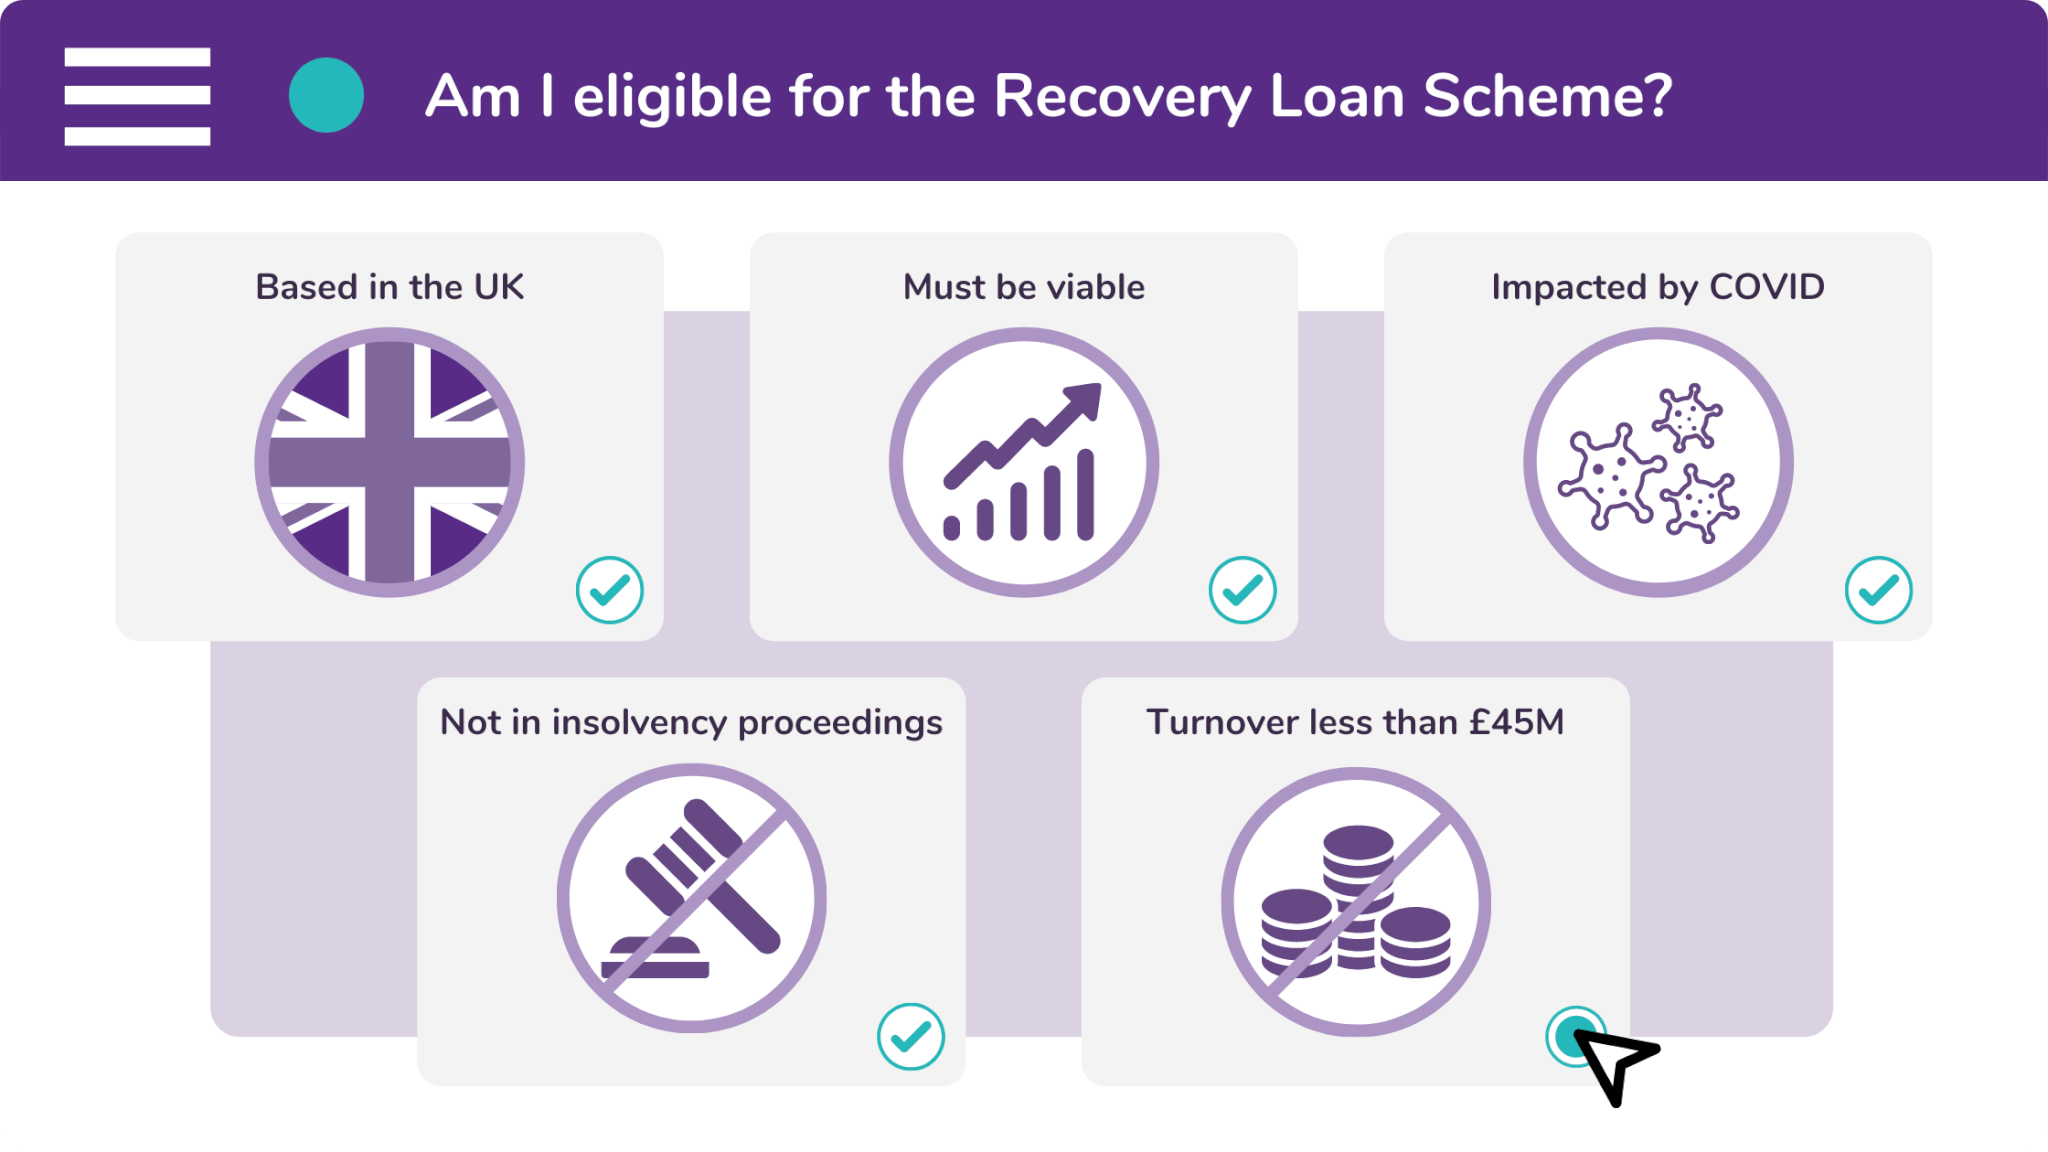 There are five criteria which you must meet to be considered for the Recovery Loan Scheme.